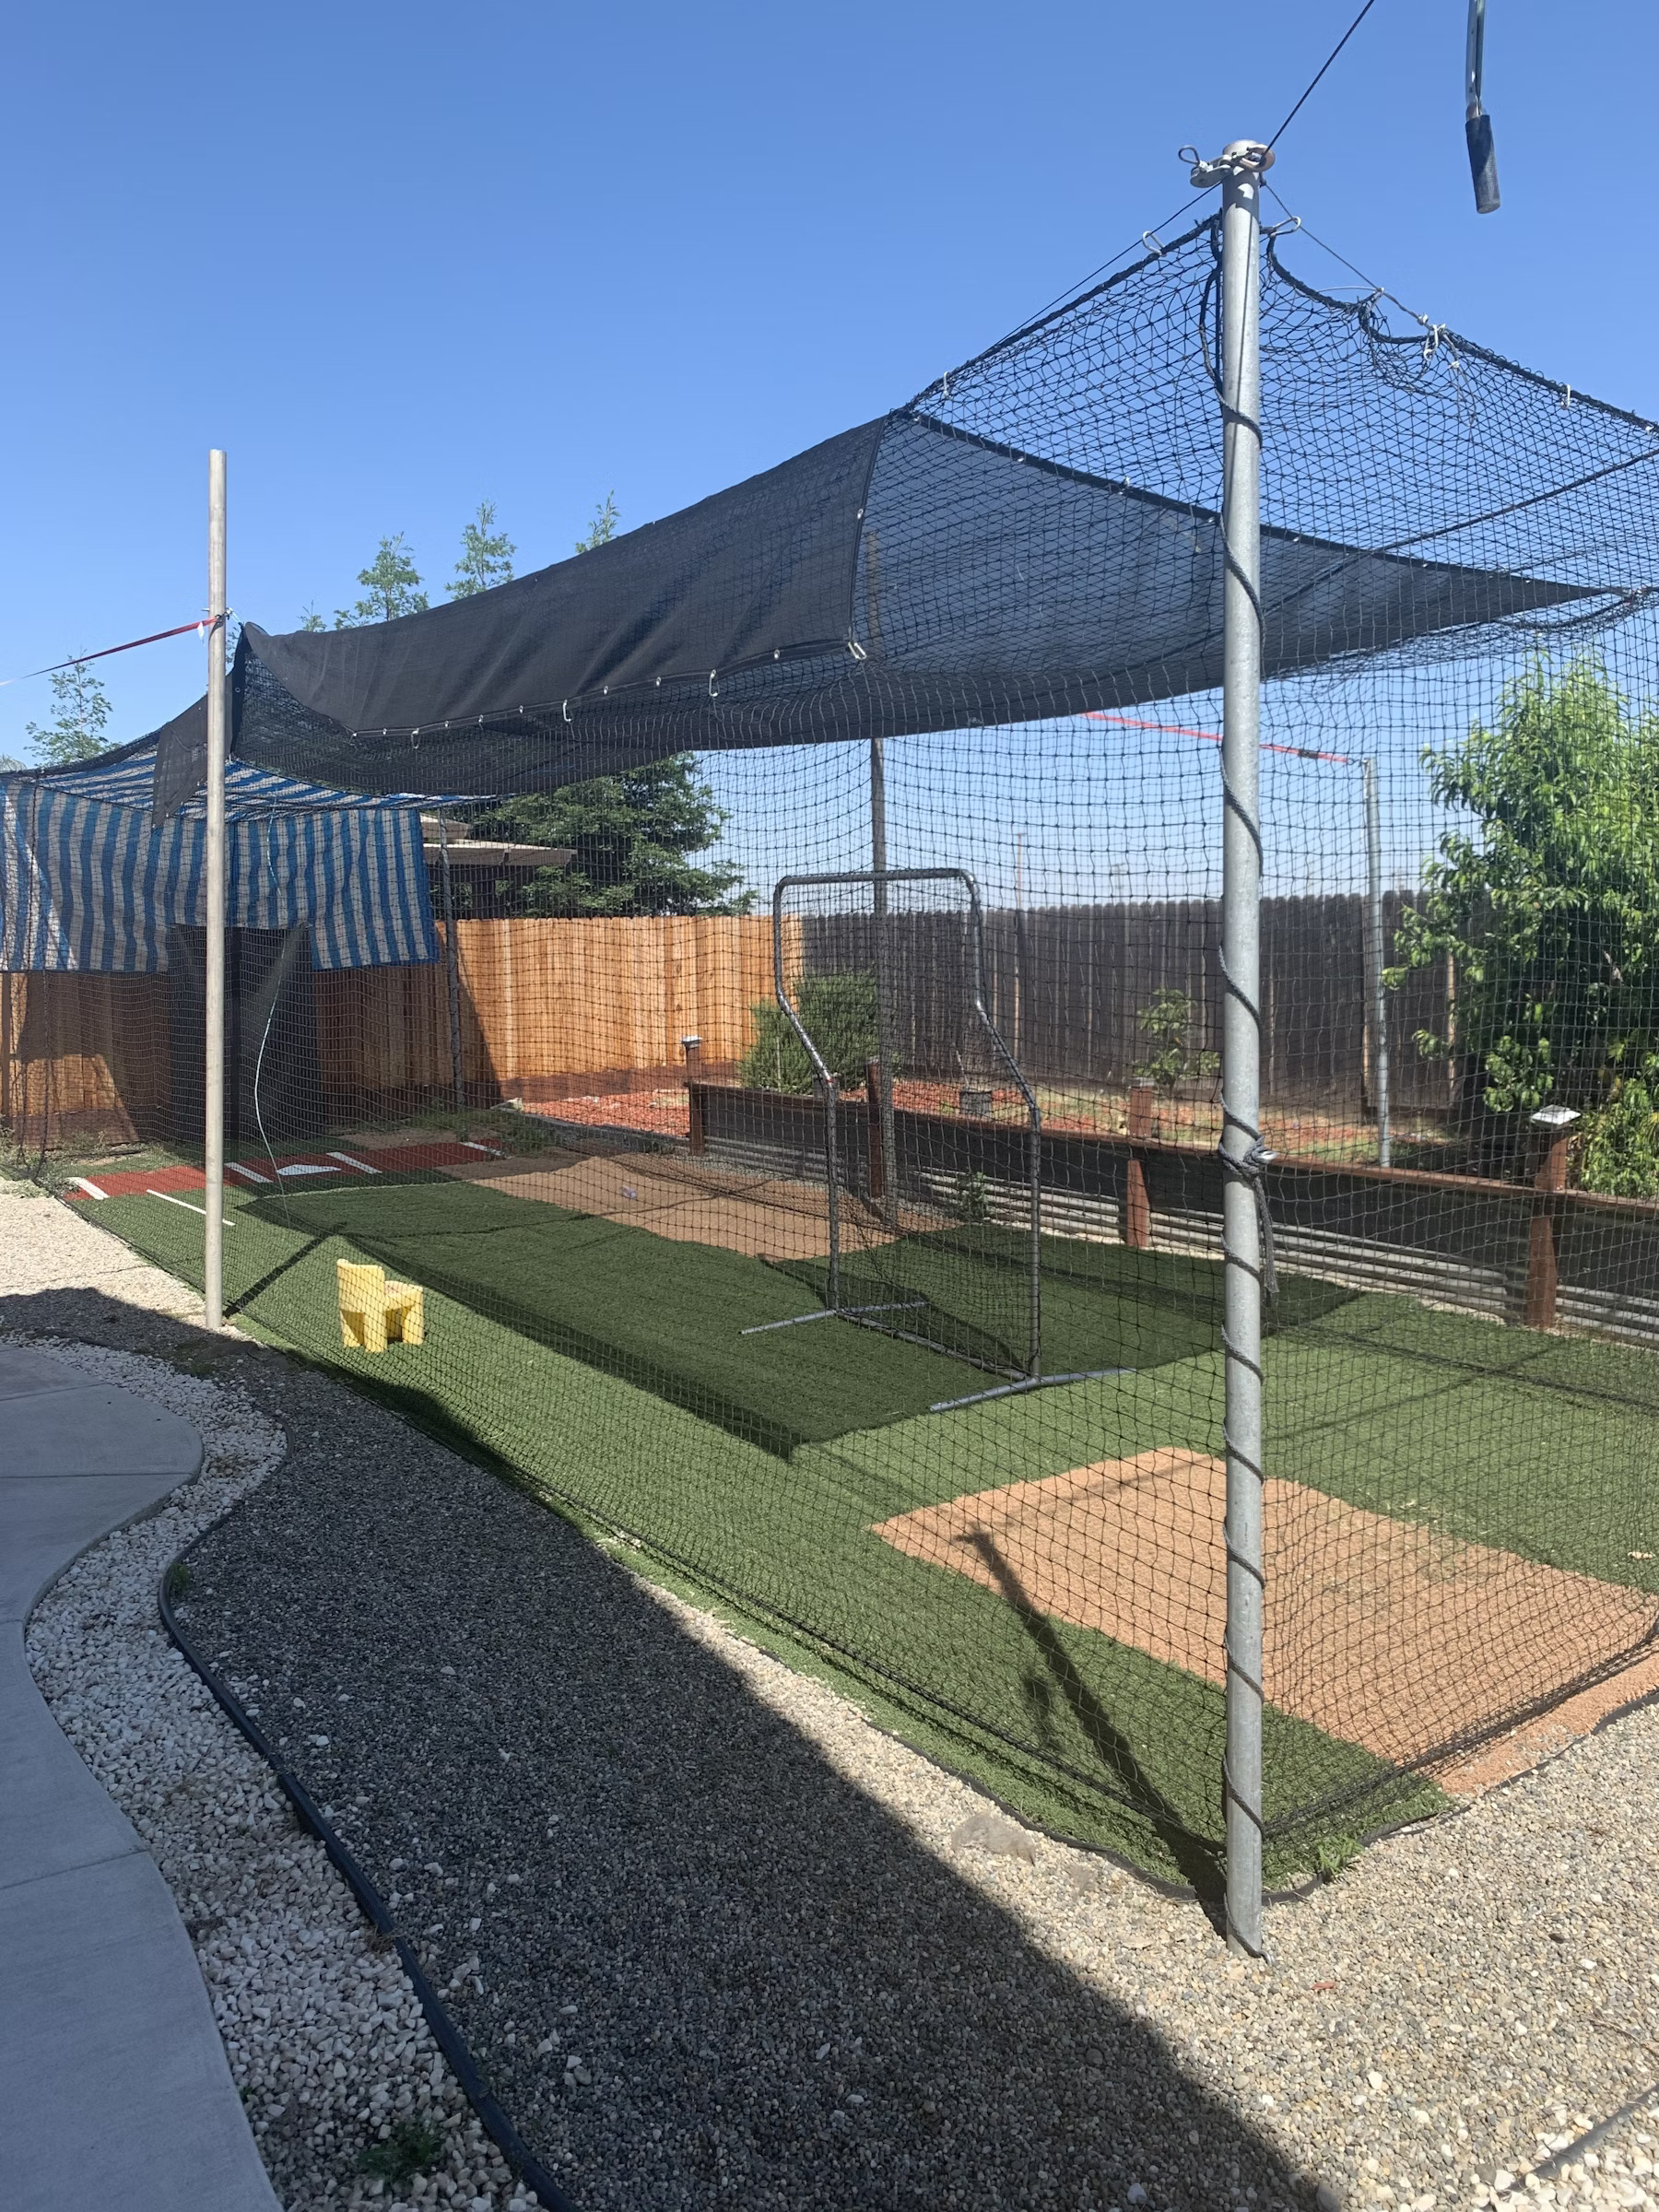 An image of a backyard batting cage showcasing how properly the batting cage poles are anchored